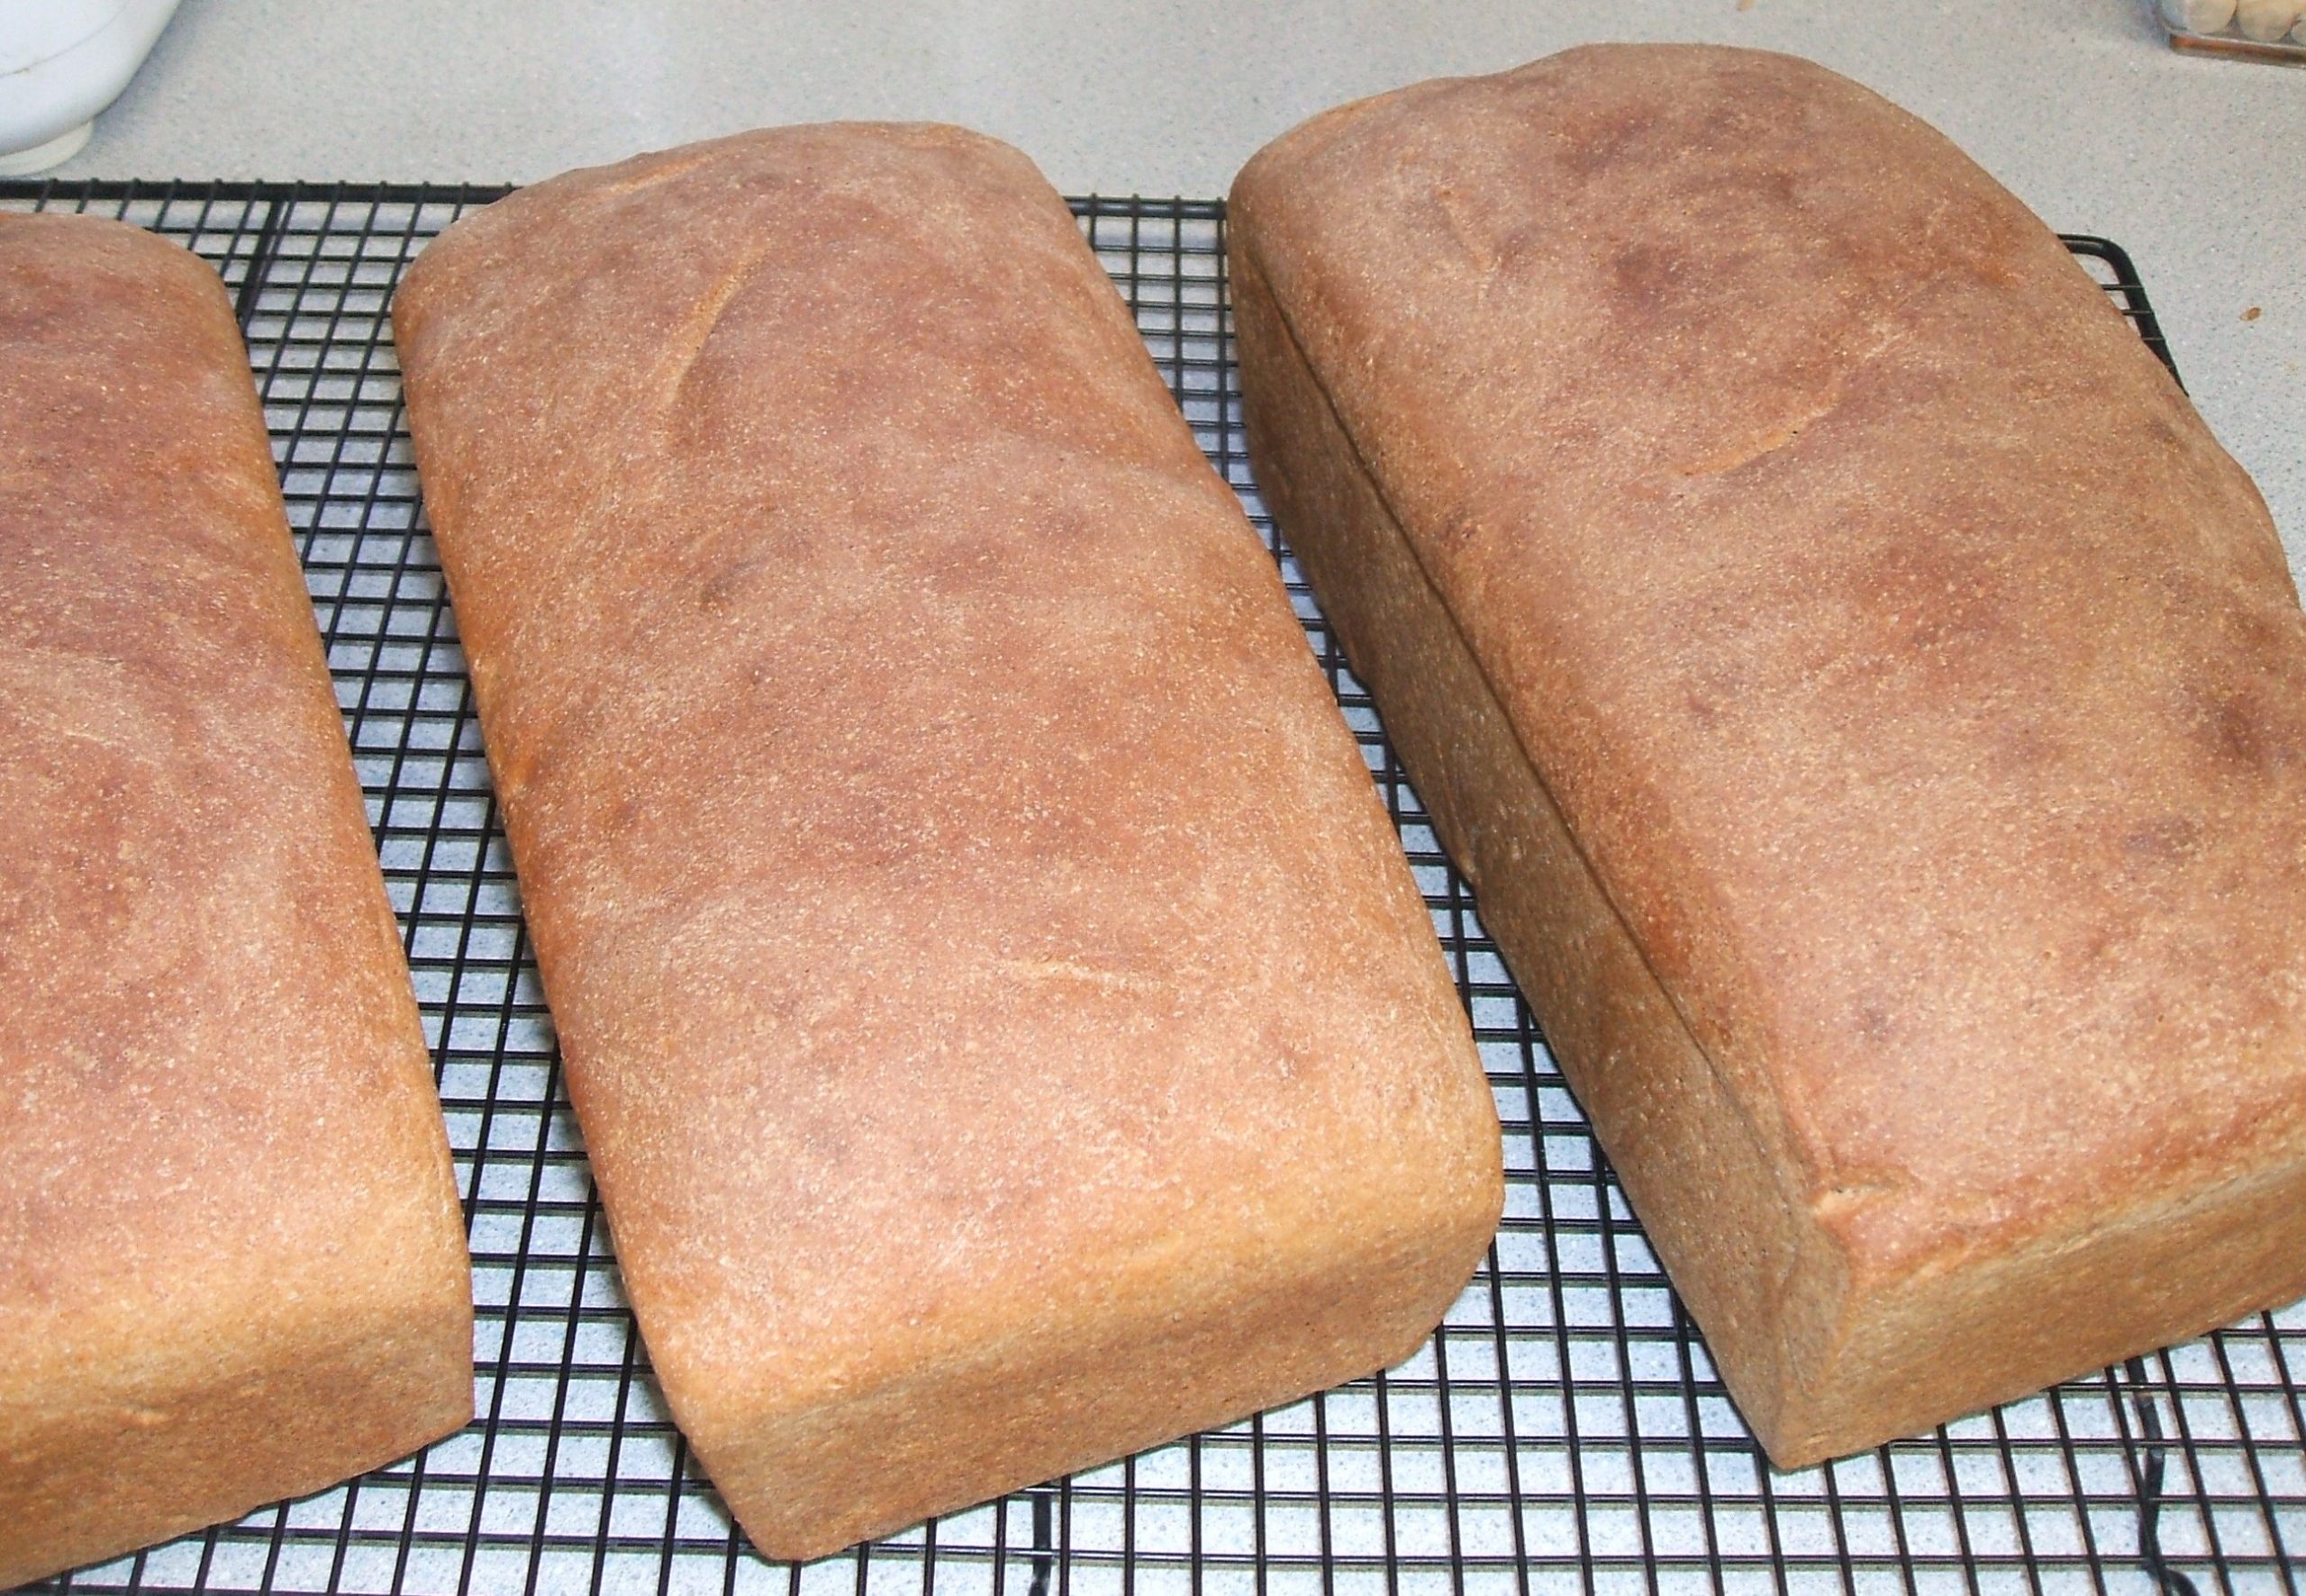 Three loaves of whole wheat bread on cooling racks